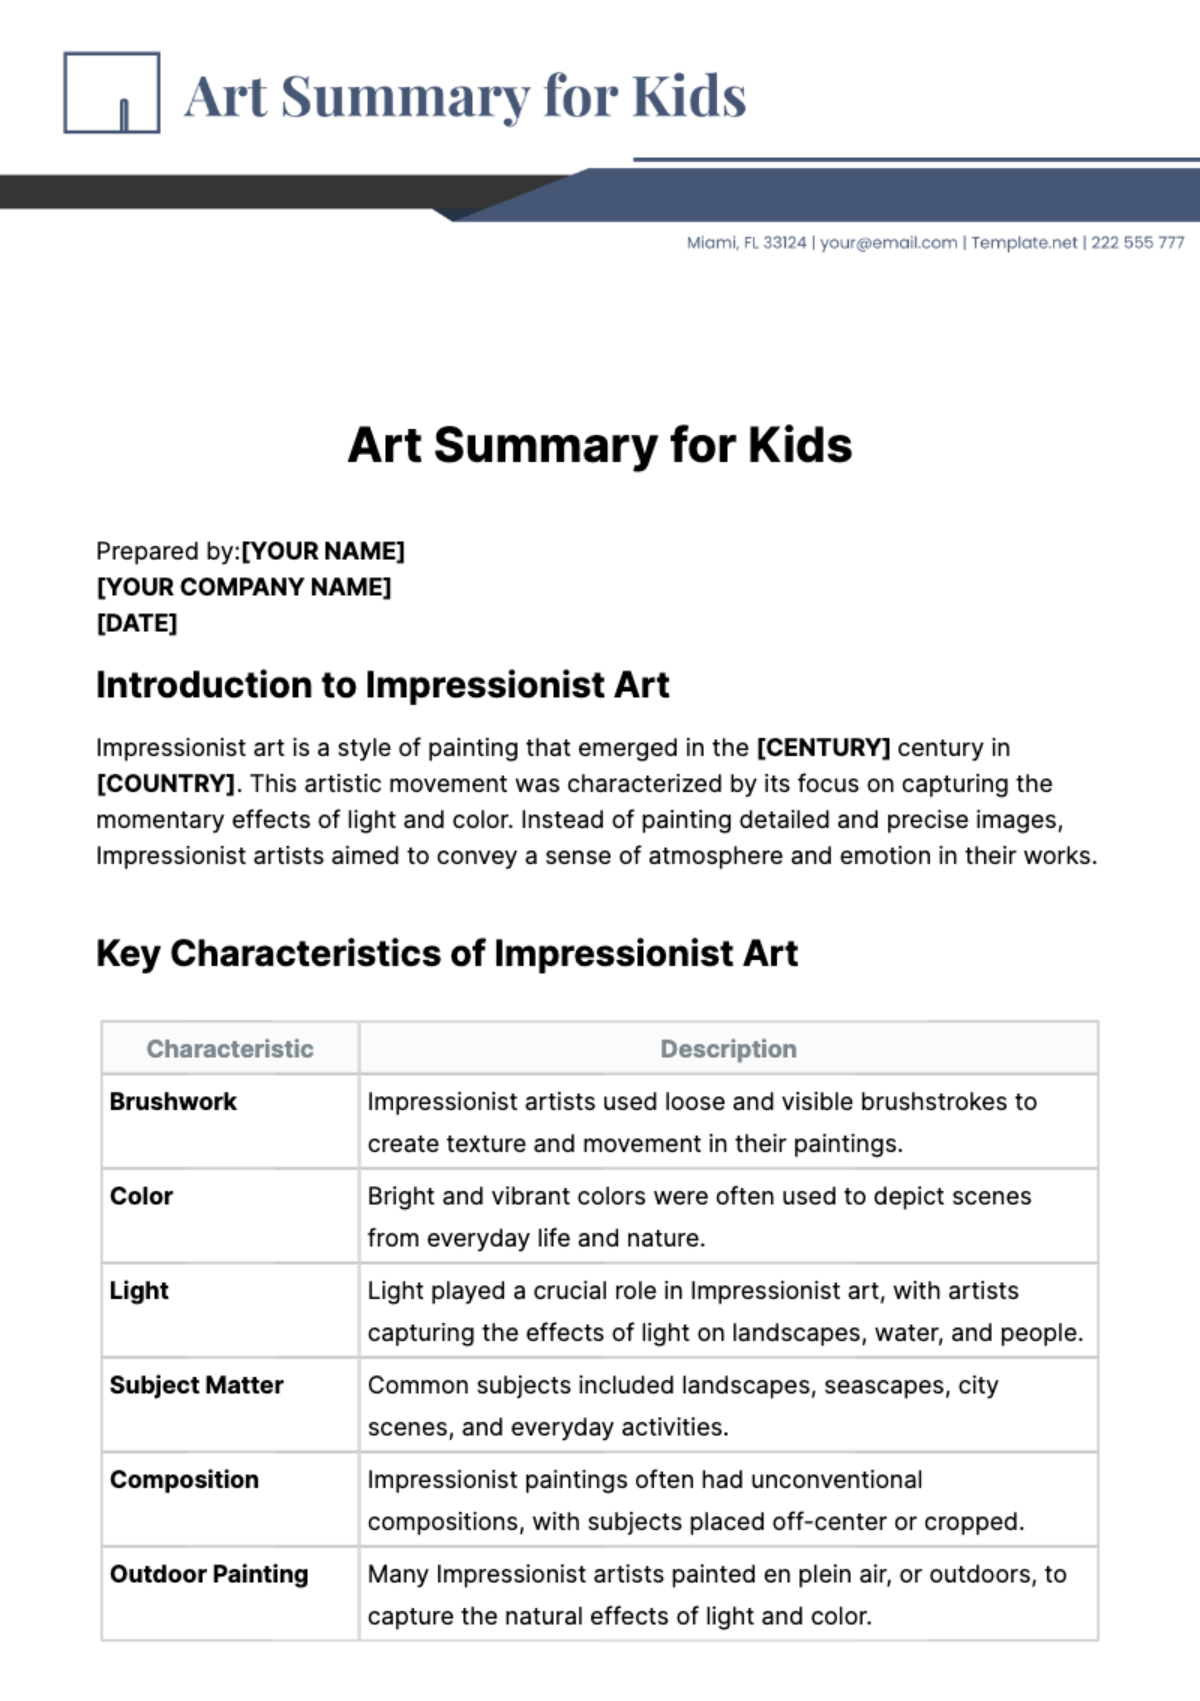 Art Summary for Kids Template